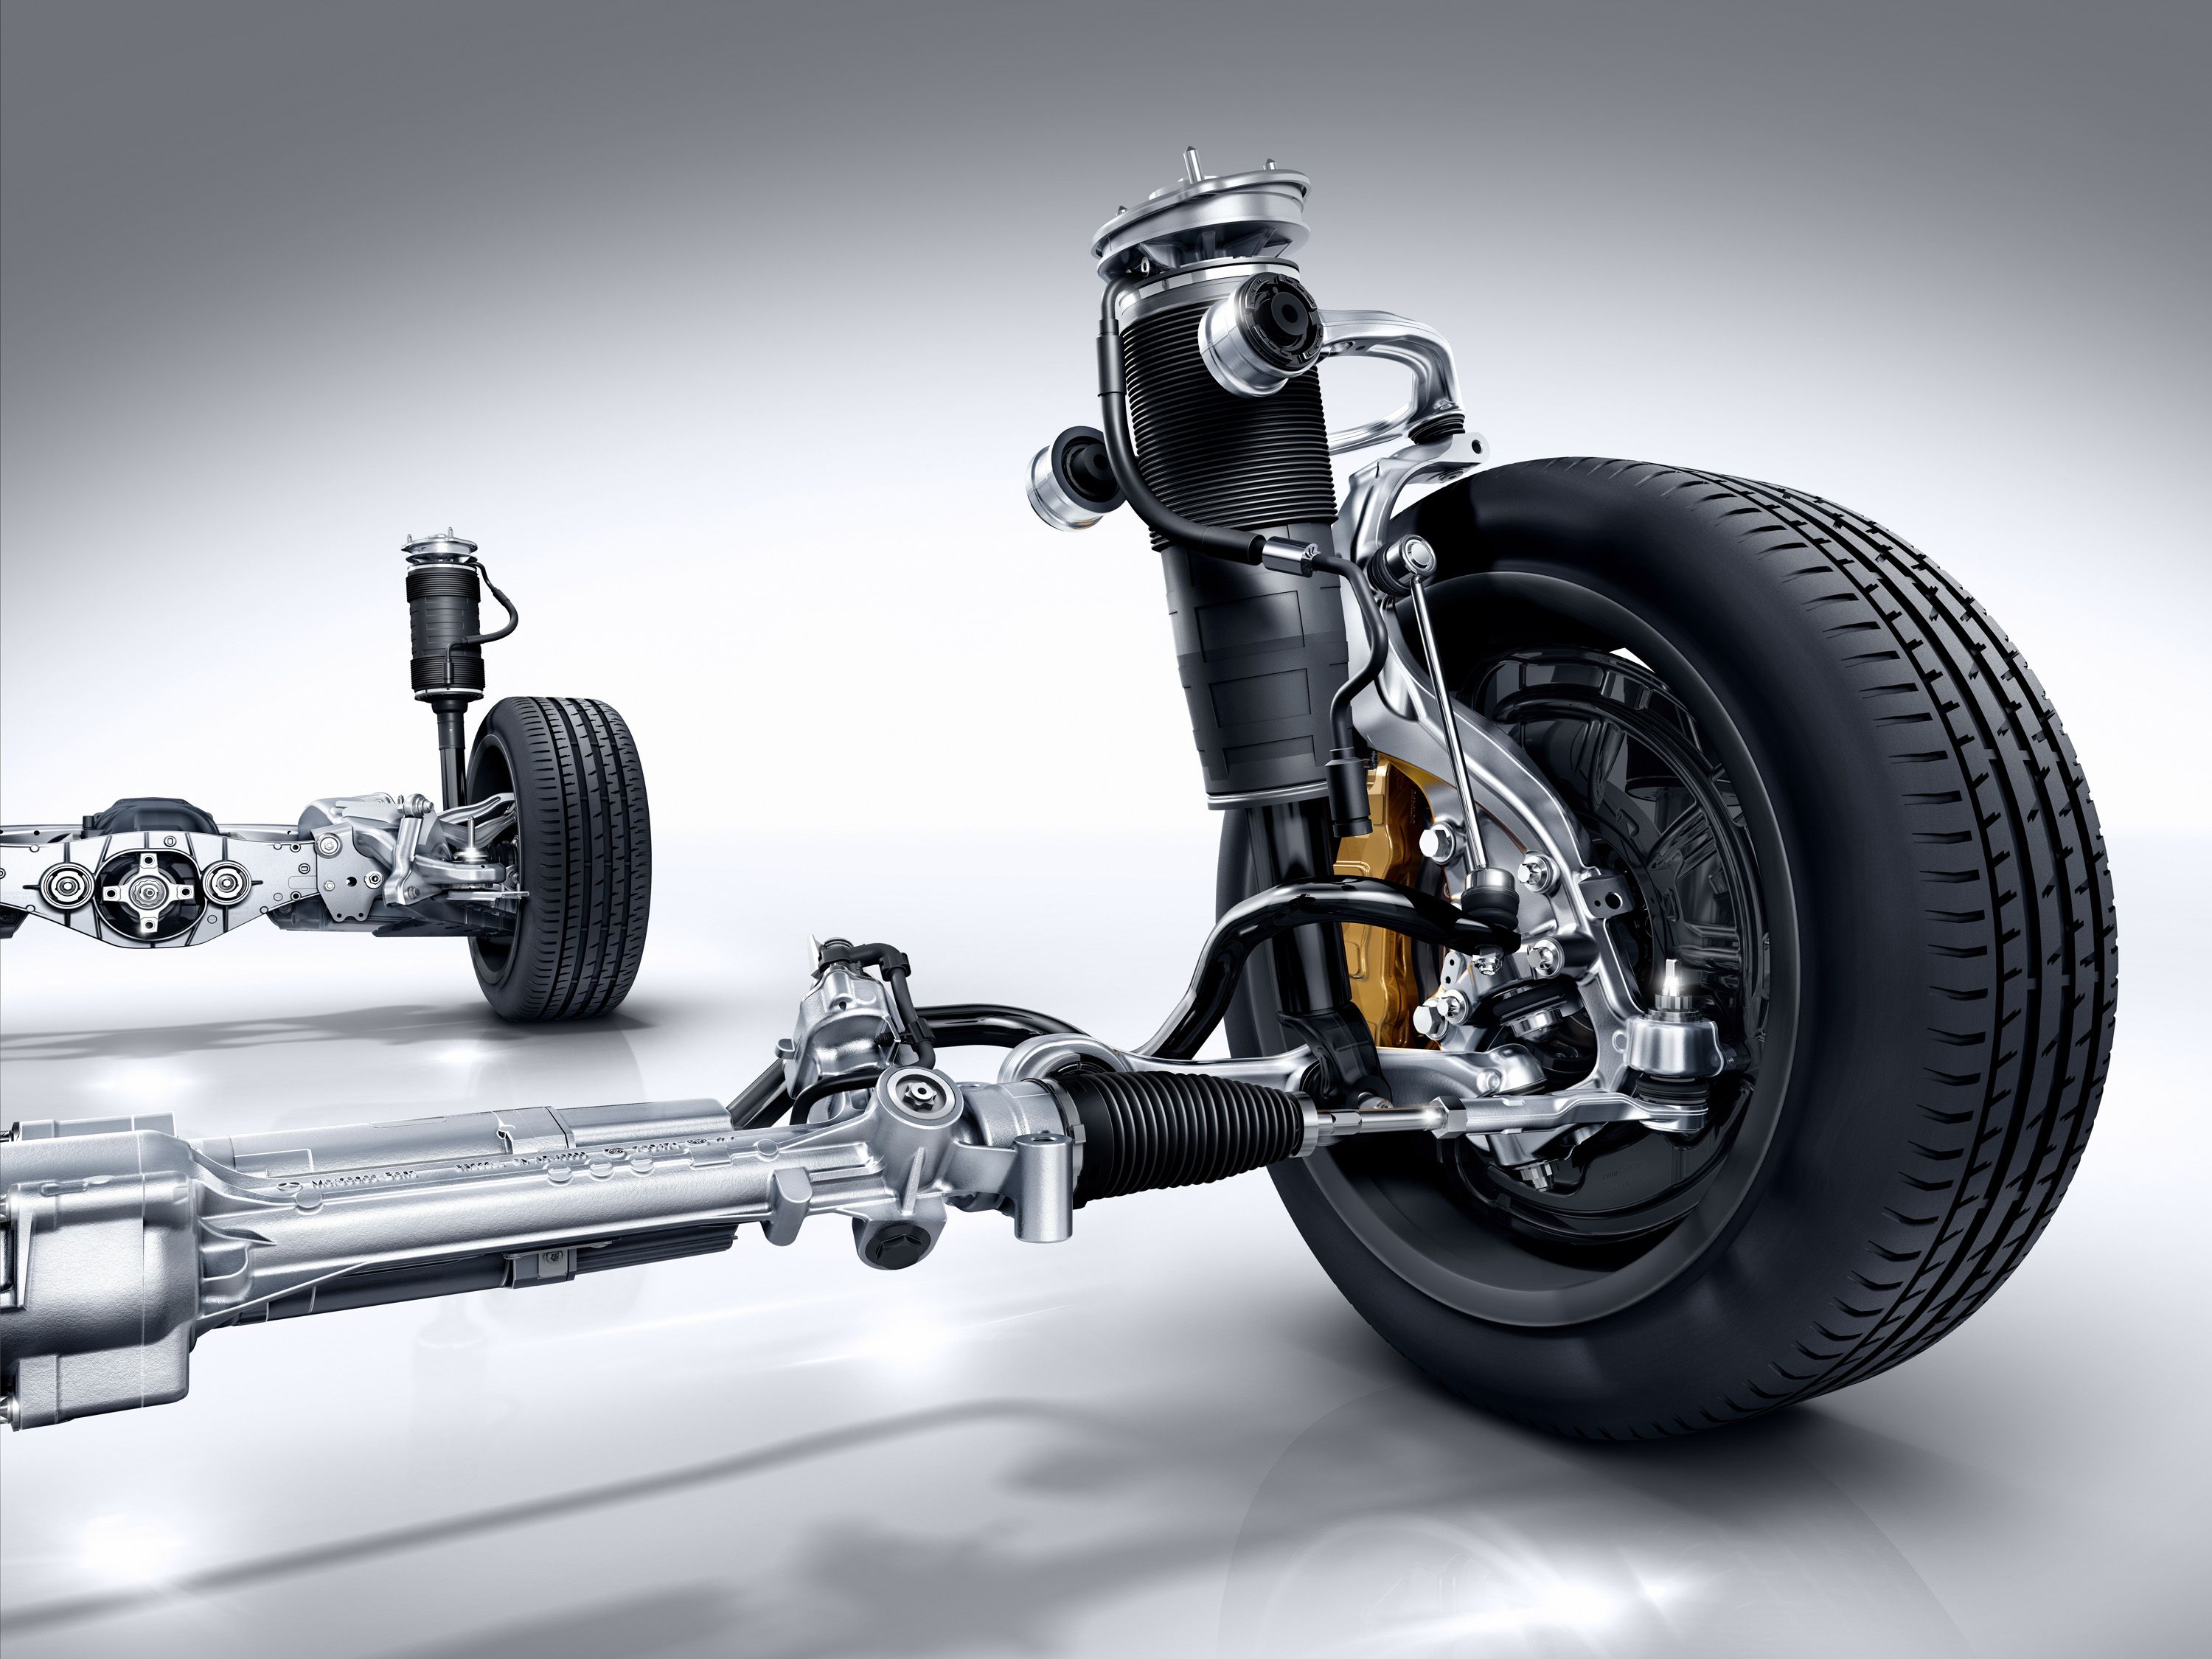 Your Vehicle's Suspension System Explained